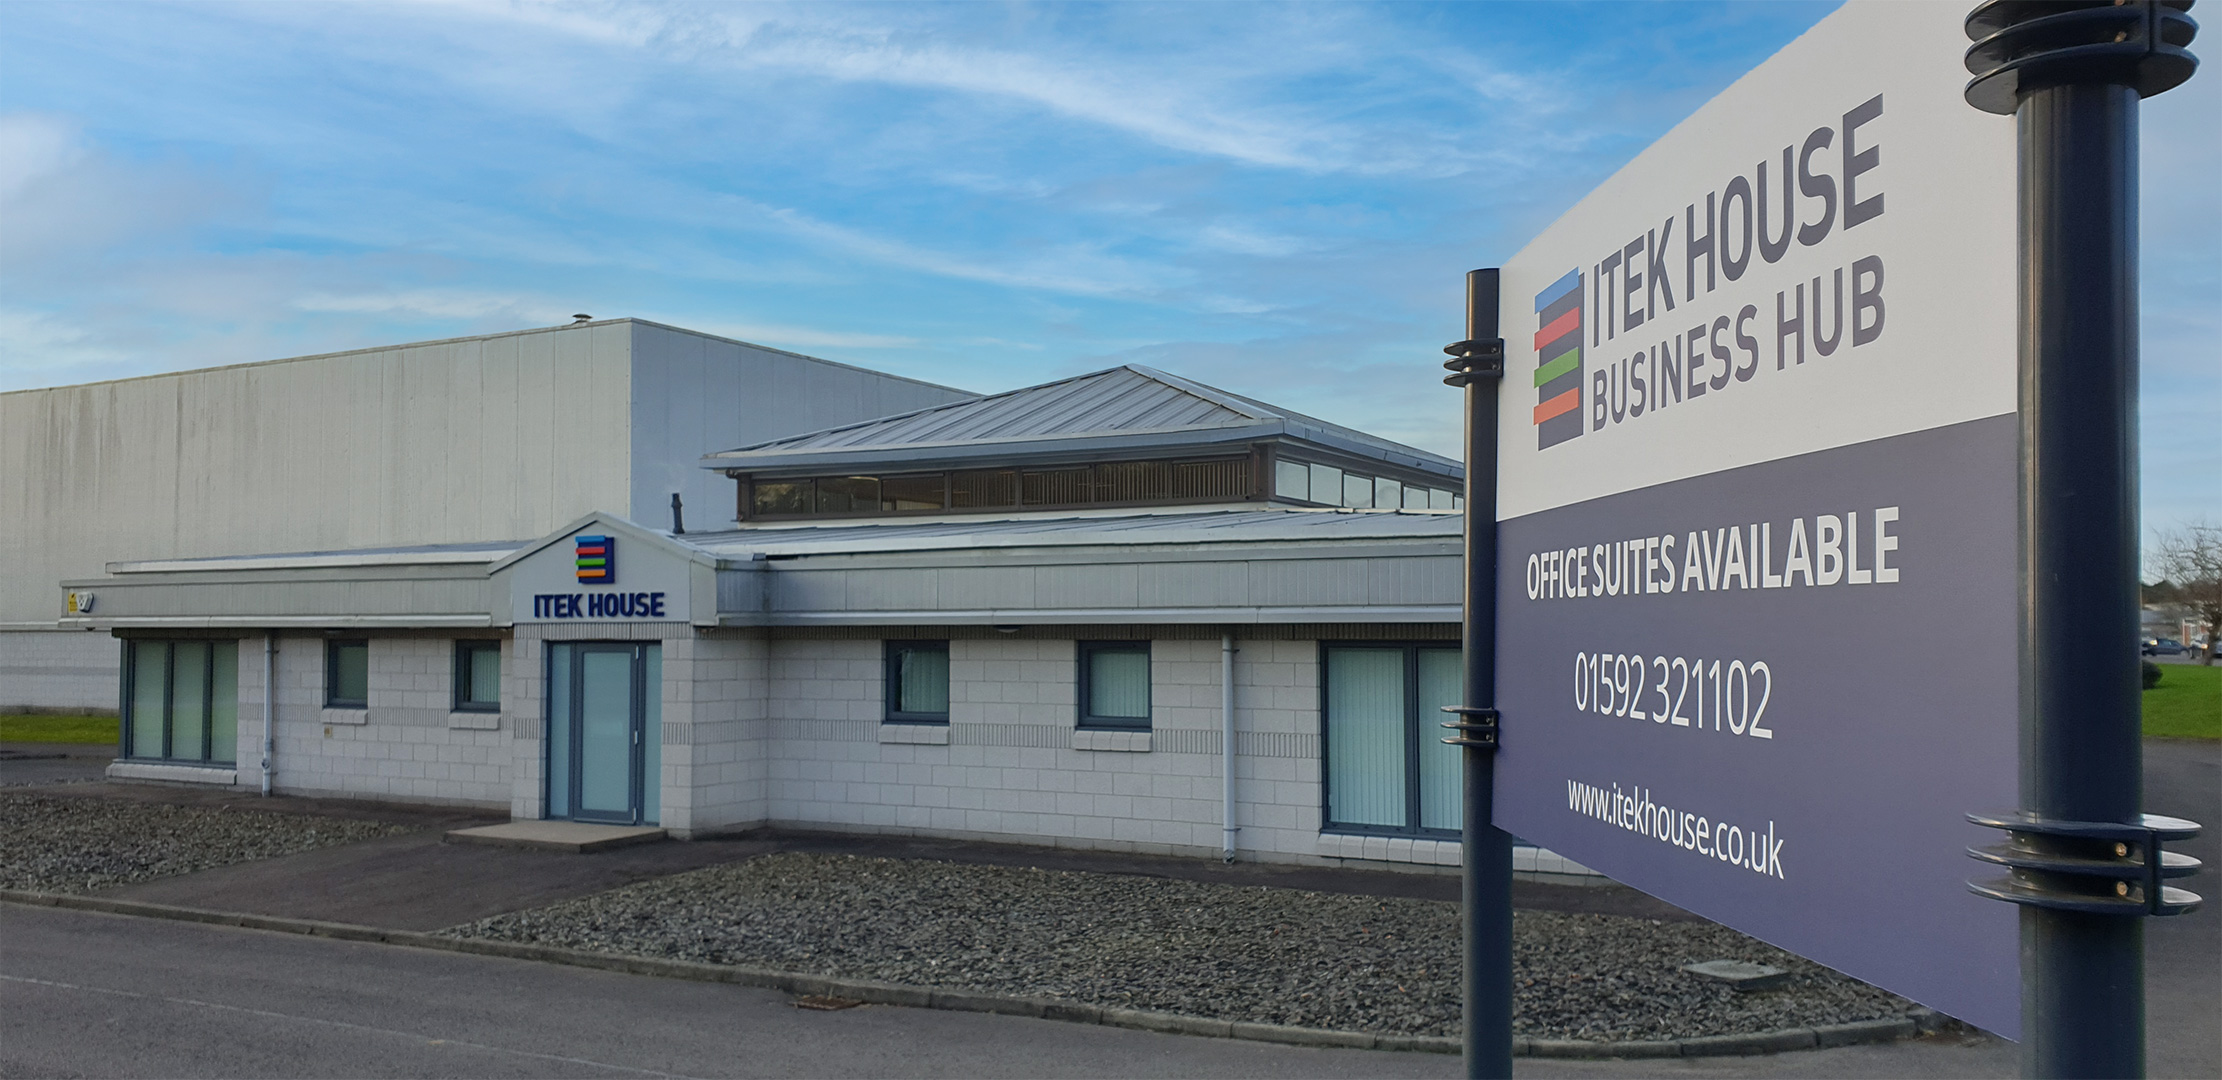 Offices now available to rent at Itek House, Glenrothes